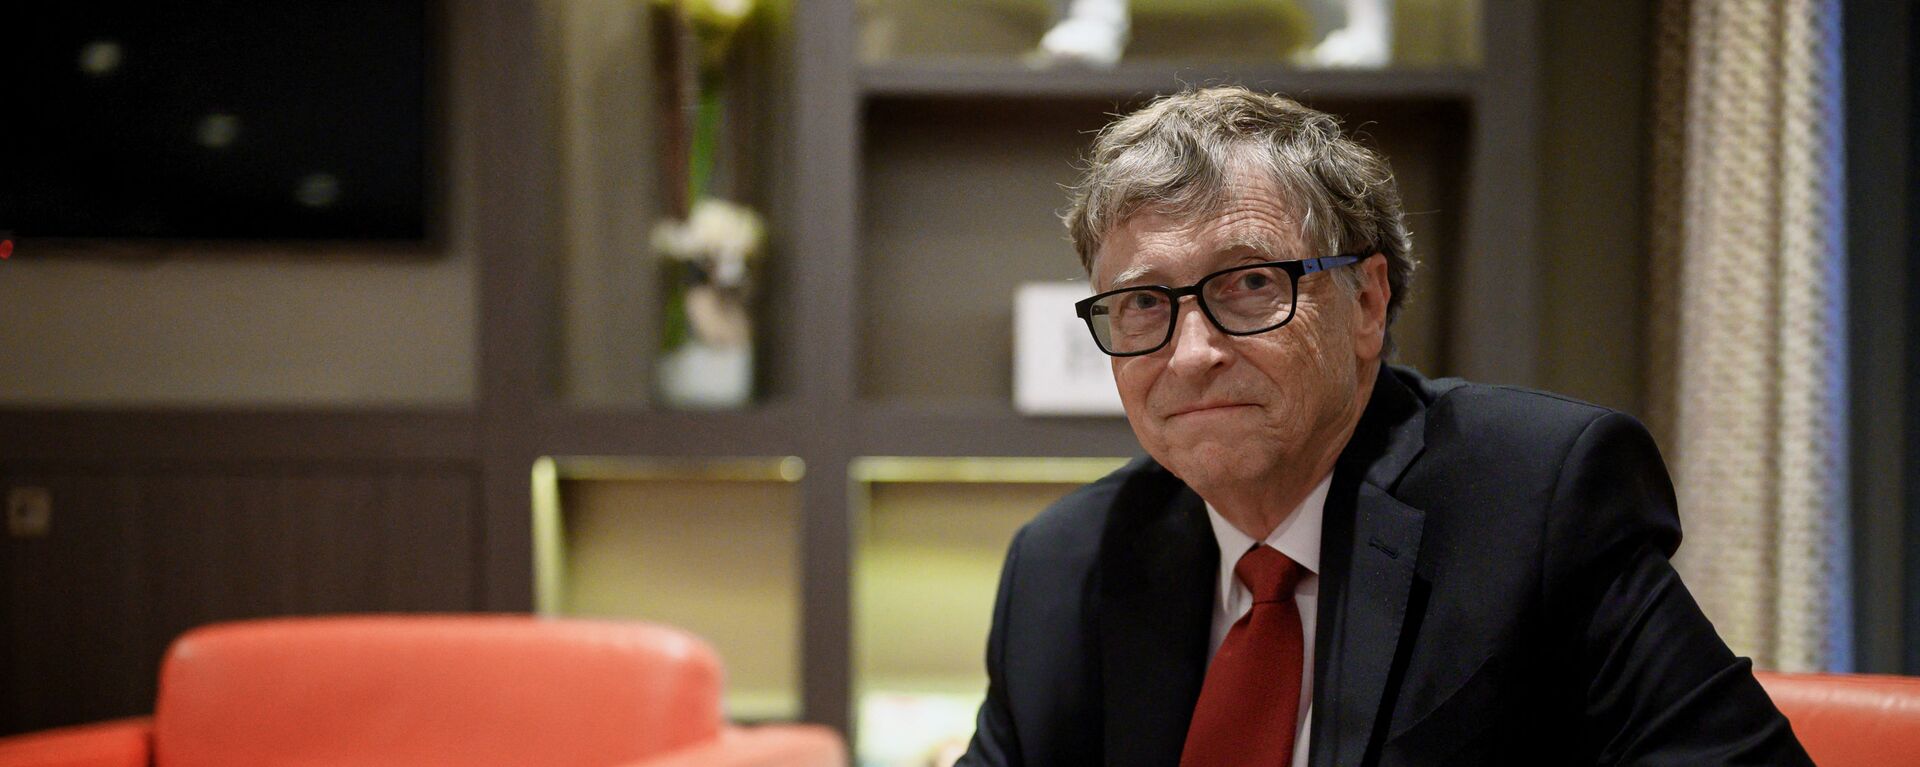 US Microsoft founder, Co-Chairman of the Bill & Melinda Gates Foundation, Bill Gates, poses for a picture on October 9, 2019, in Lyon, central eastern France, during the funding conference of Global Fund to Fight AIDS, Tuberculosis and Malaria.  - Sputnik International, 1920, 04.05.2022